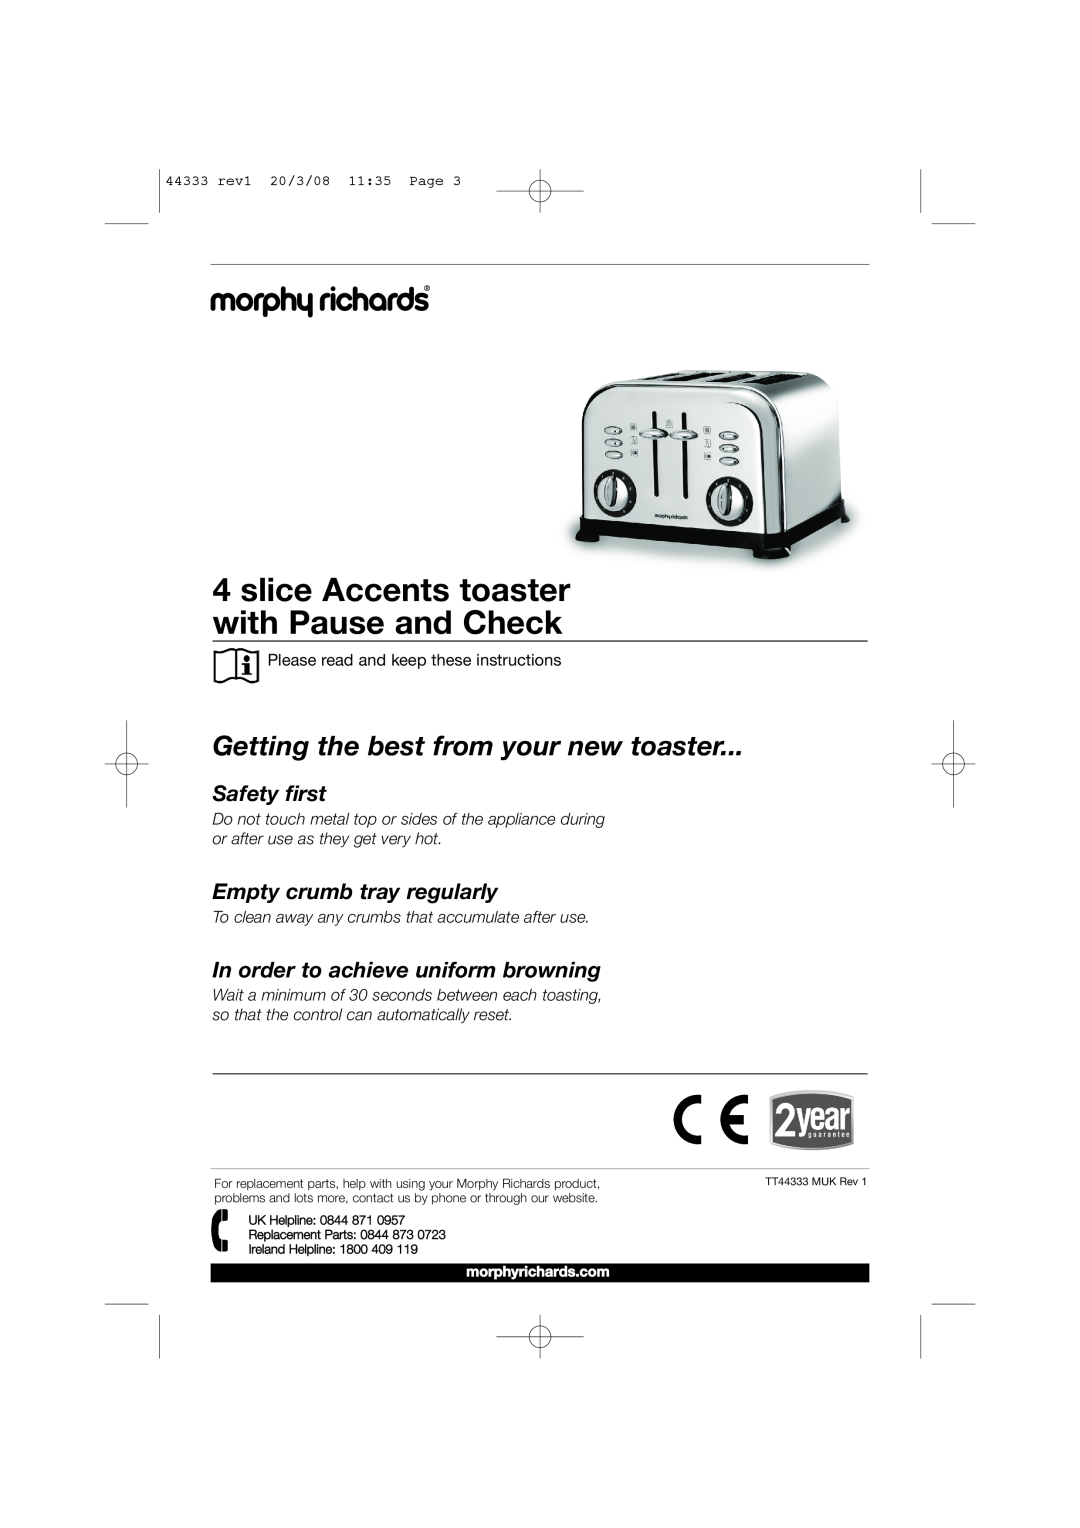 Morphy Richards 44333 slice Accents toaster with Pause and Check, Getting the best from your new toaster, Safety first 